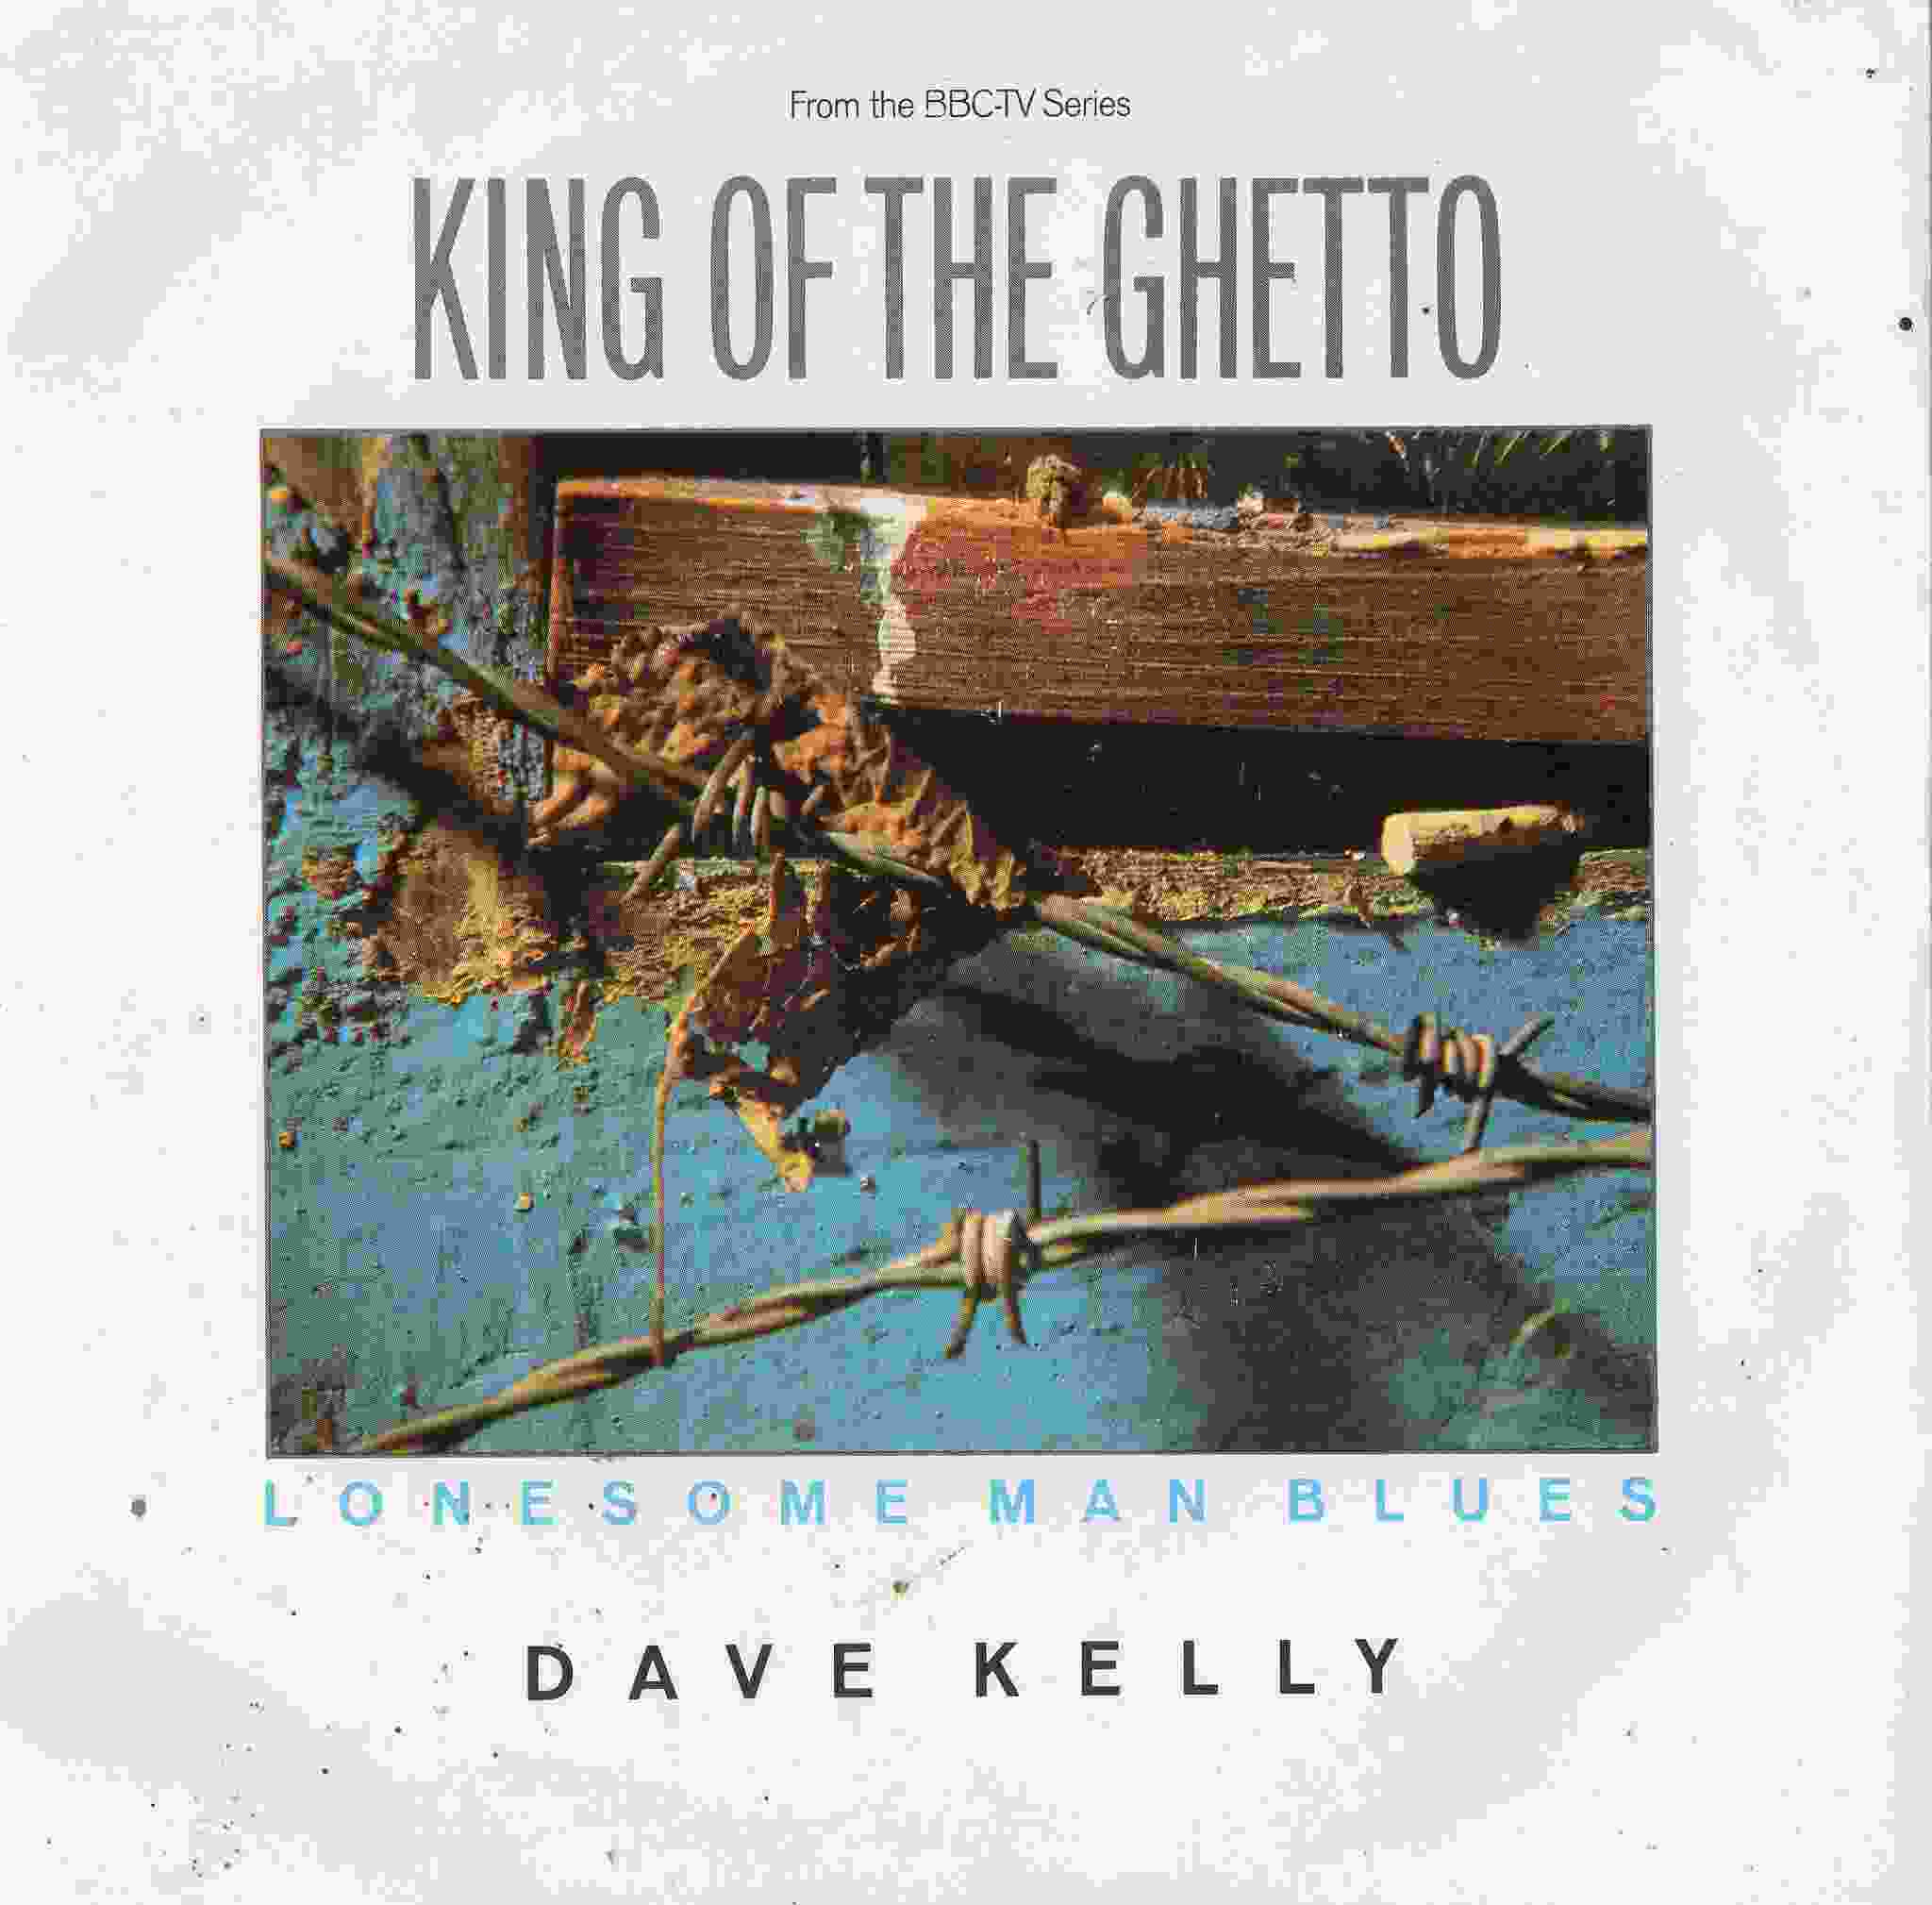 Picture of Lonesome man blues (King of the ghetto) by artist Dave Kelly from the BBC singles - Records and Tapes library